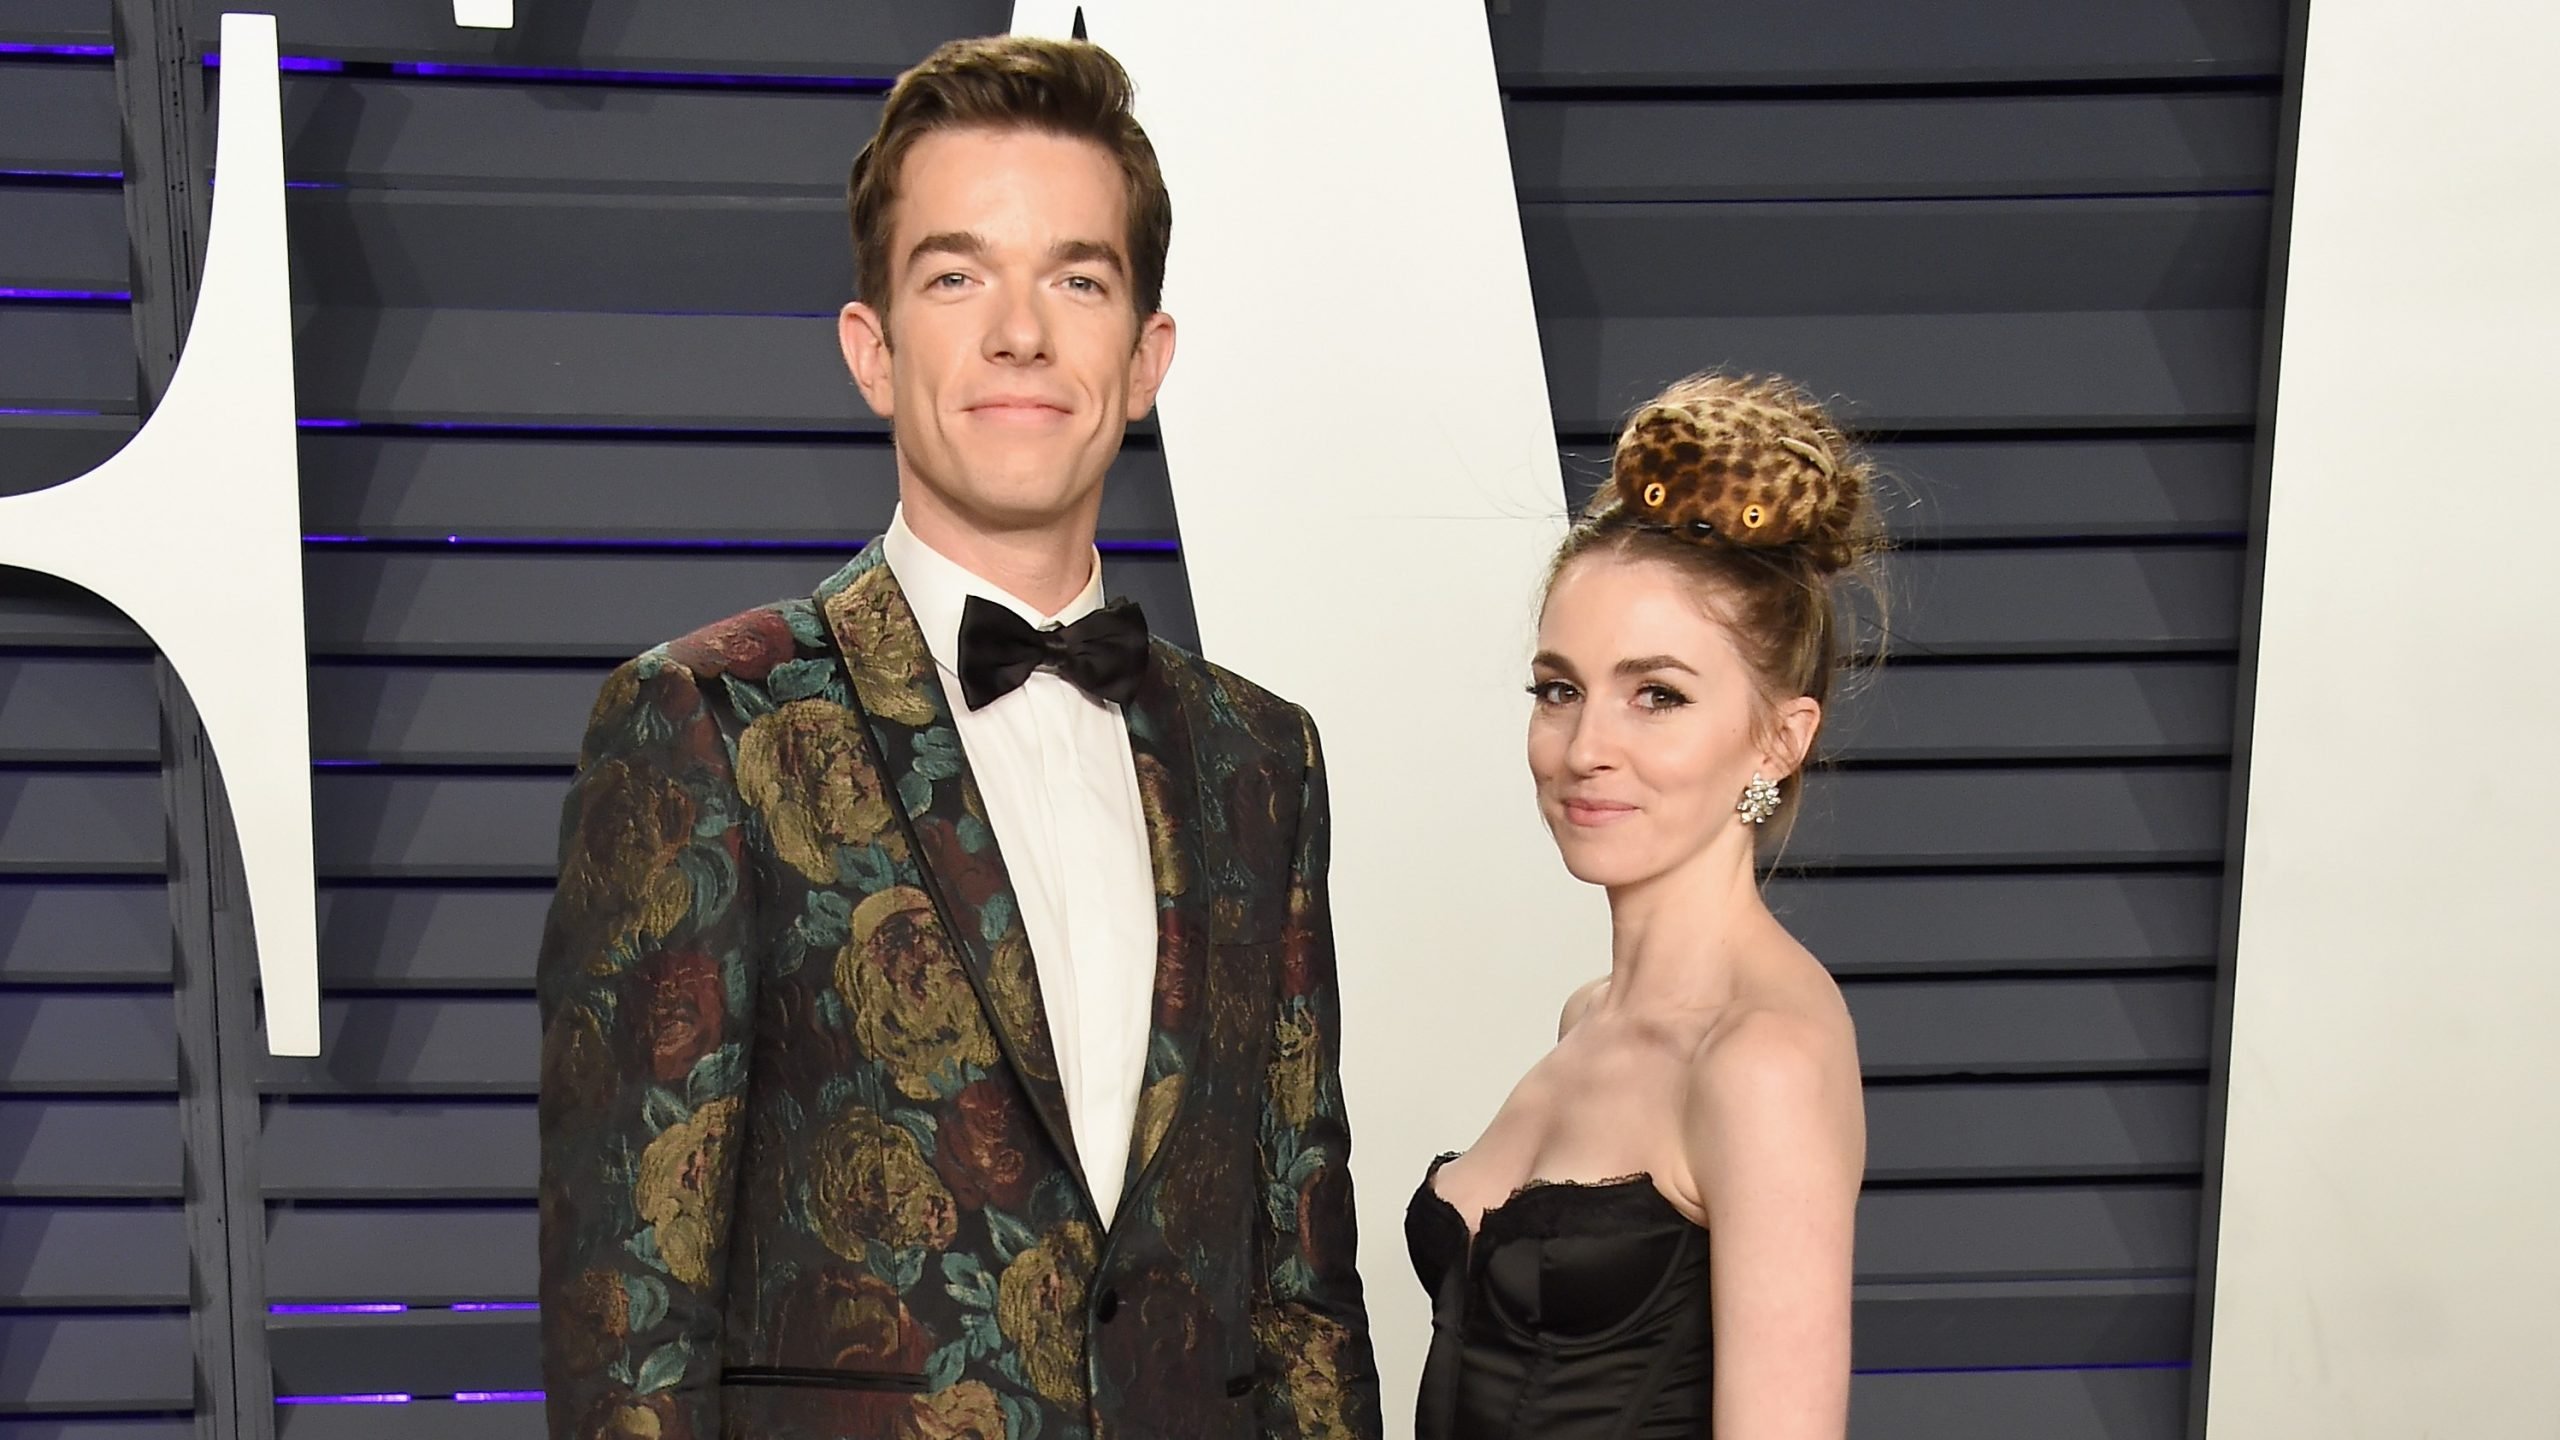 John Mulaney in floral jacket and Anna Marie Tendler in black top